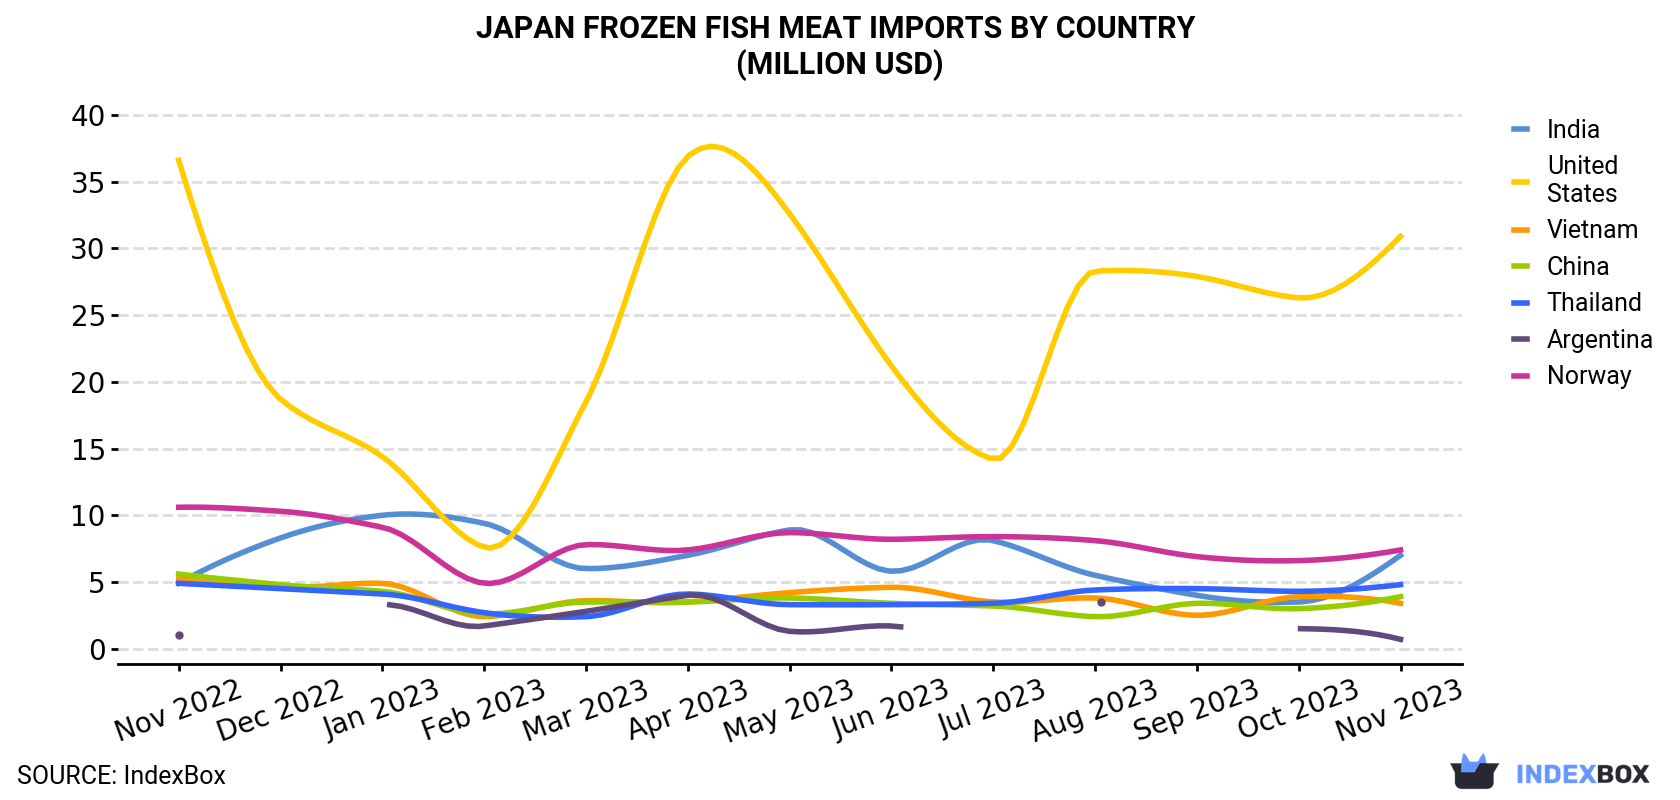 Japan Frozen Fish Meat Imports By Country (Million USD)